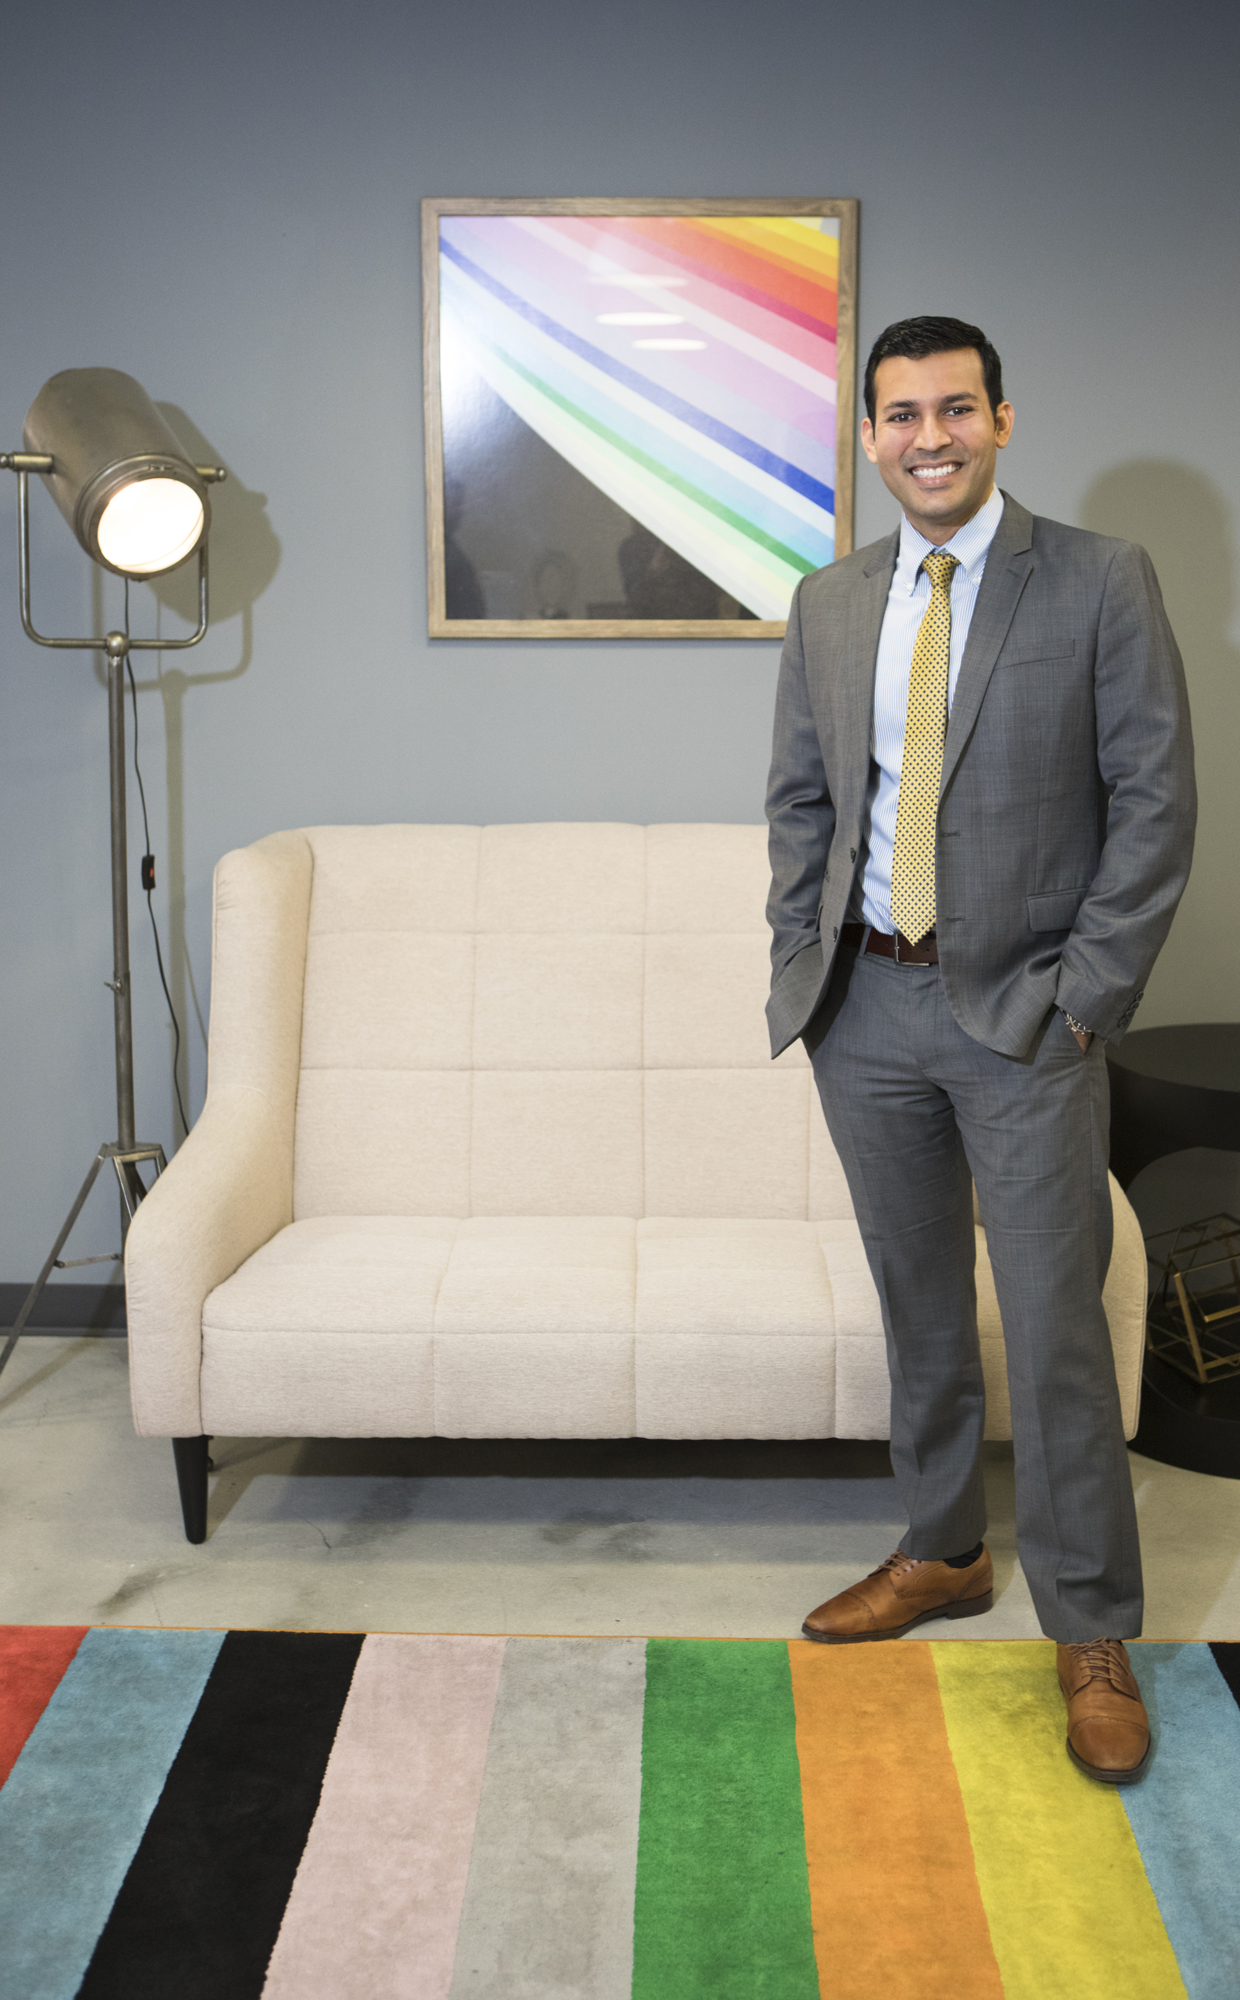 Mark Wemple. Kalpesh Patel founded St. Petersburg-based FL Patel Law PLLC in 2016. Patel specializes in business law, particularly legal services for startups and entrepreneurs, and offers innovative services like flat-fee rates.